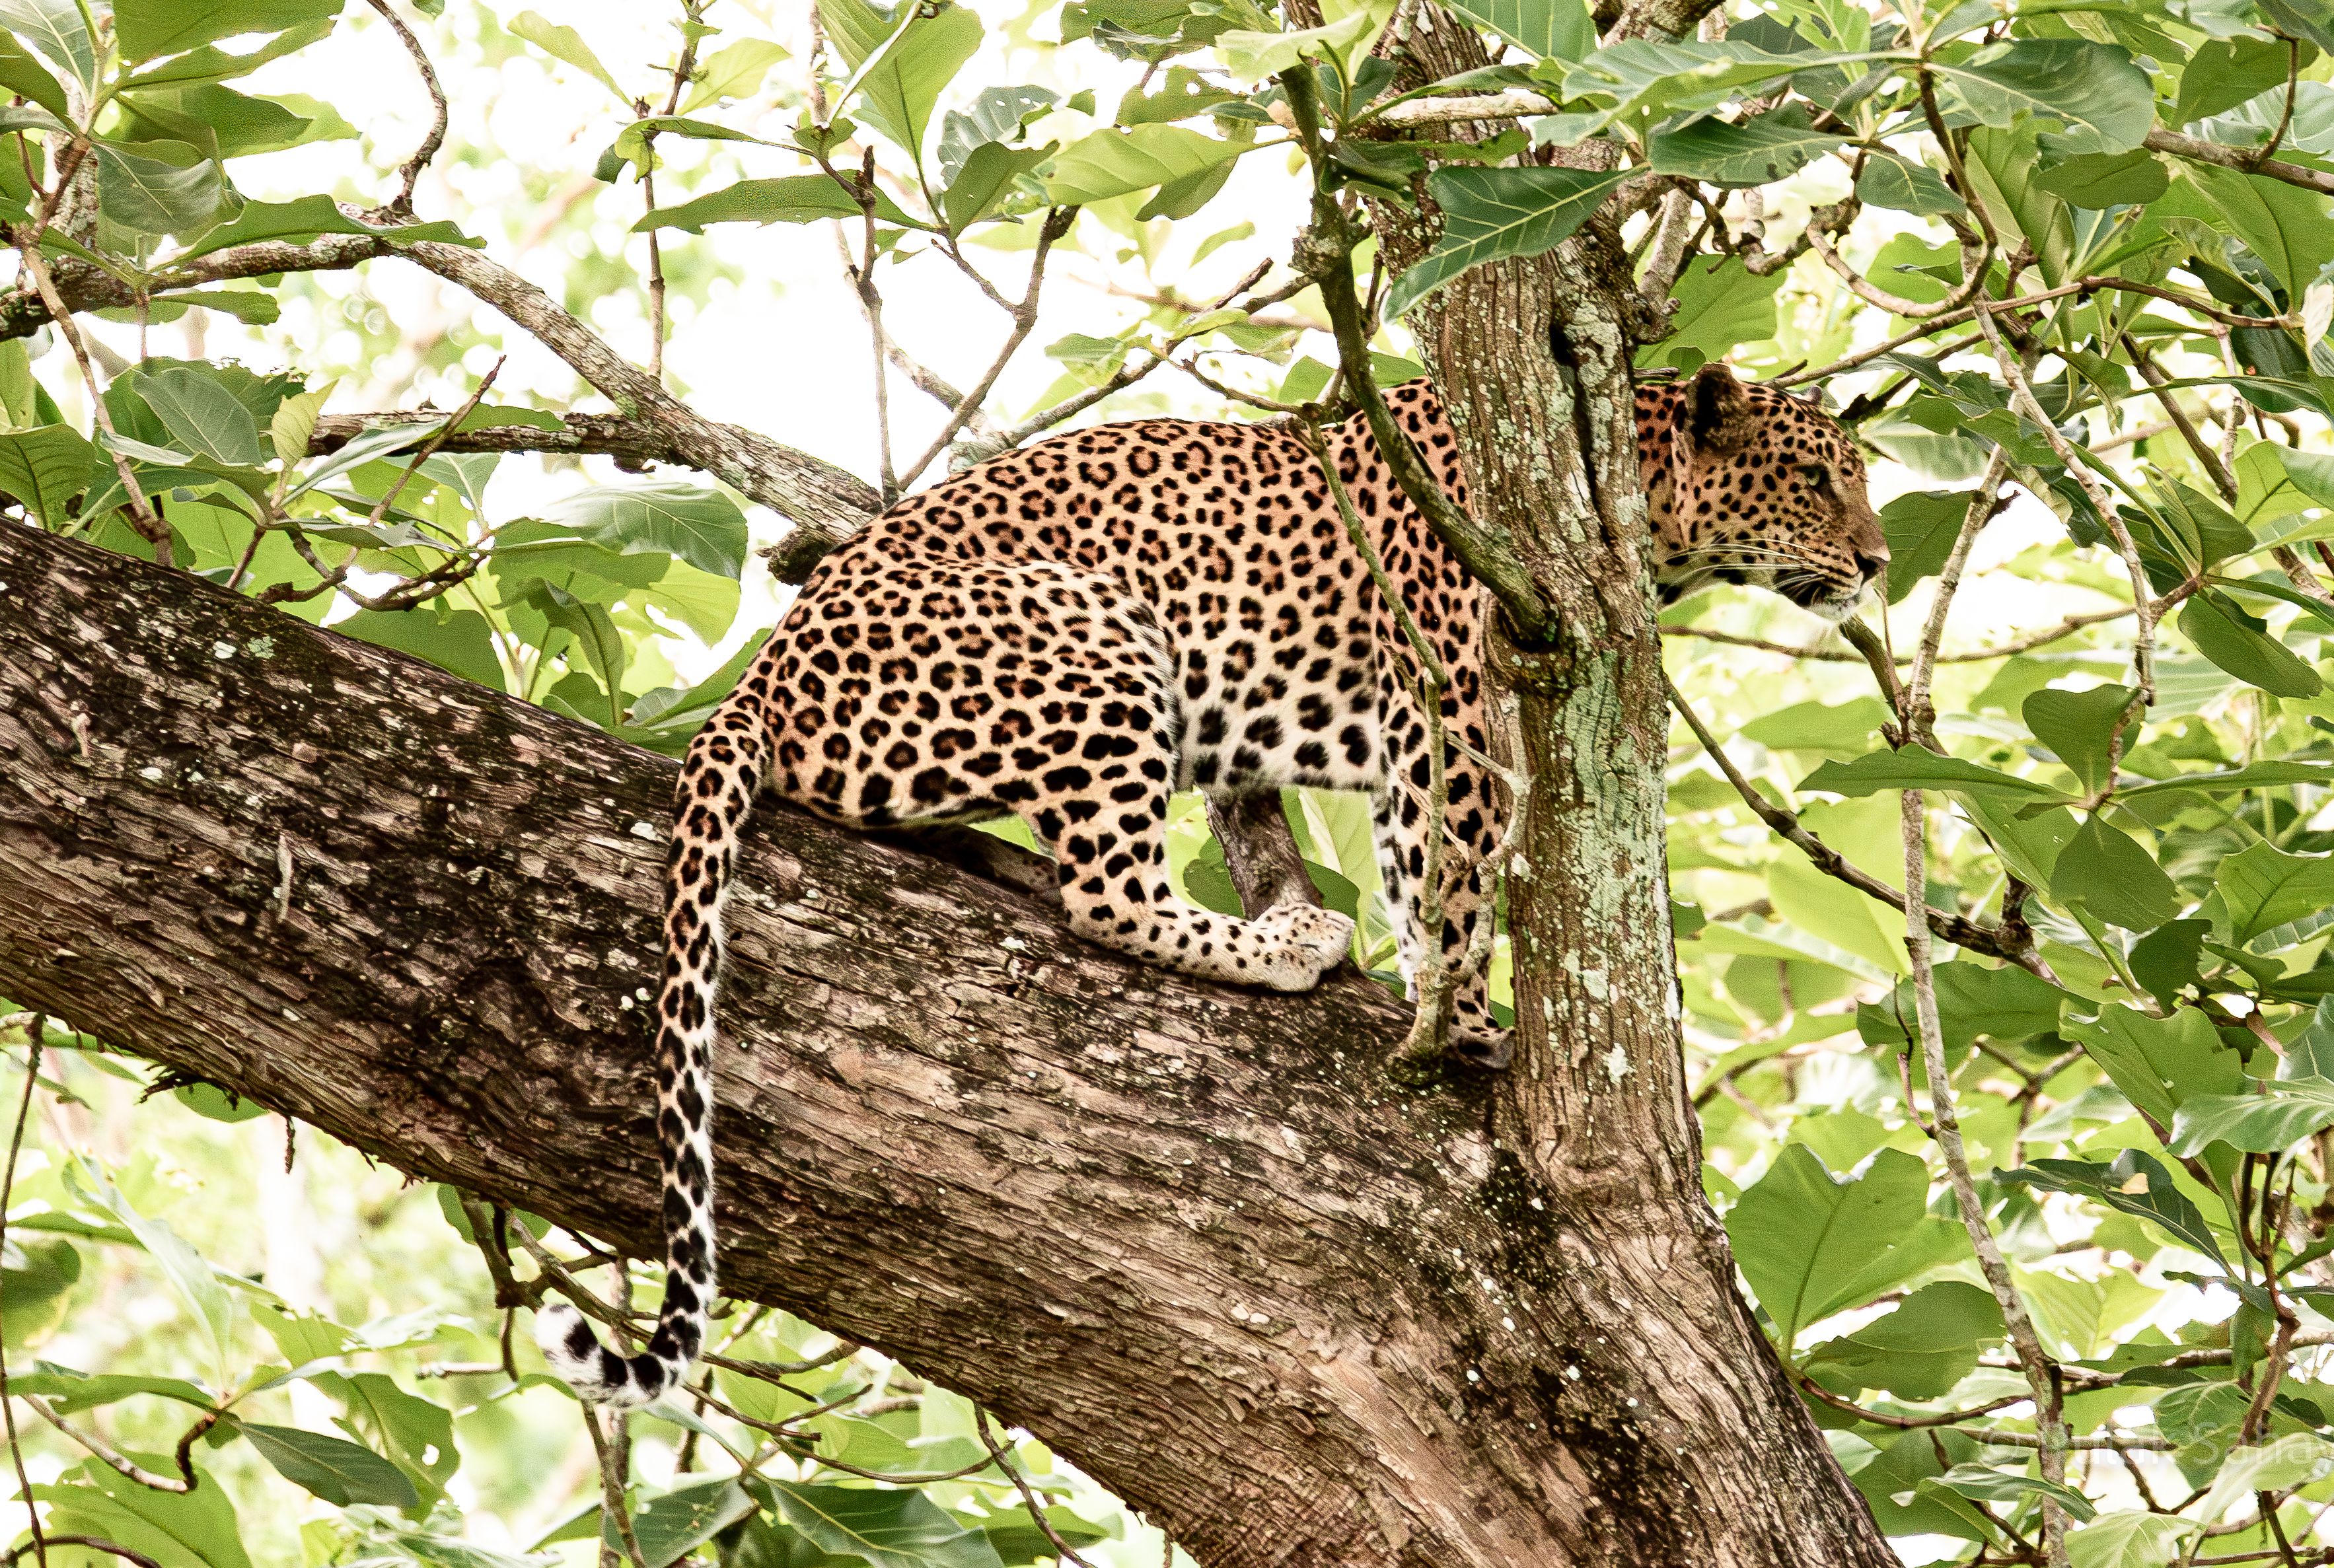 Leopard camouflaged in tree